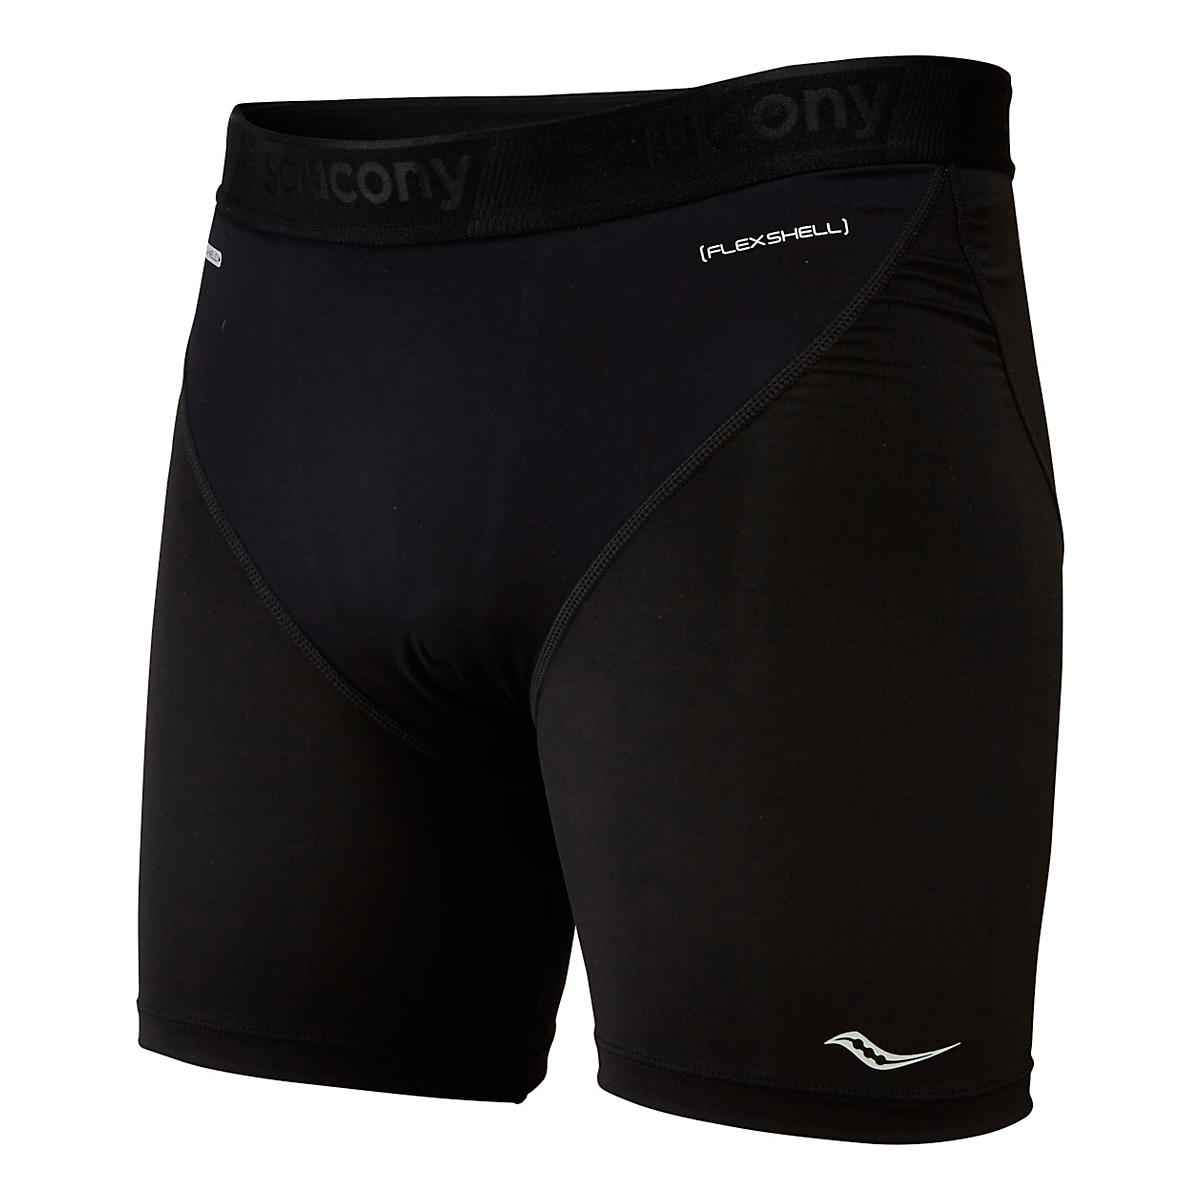 Mens Saucony Windproof Boxer Brief Underwear Bottoms at Road Runner Sports